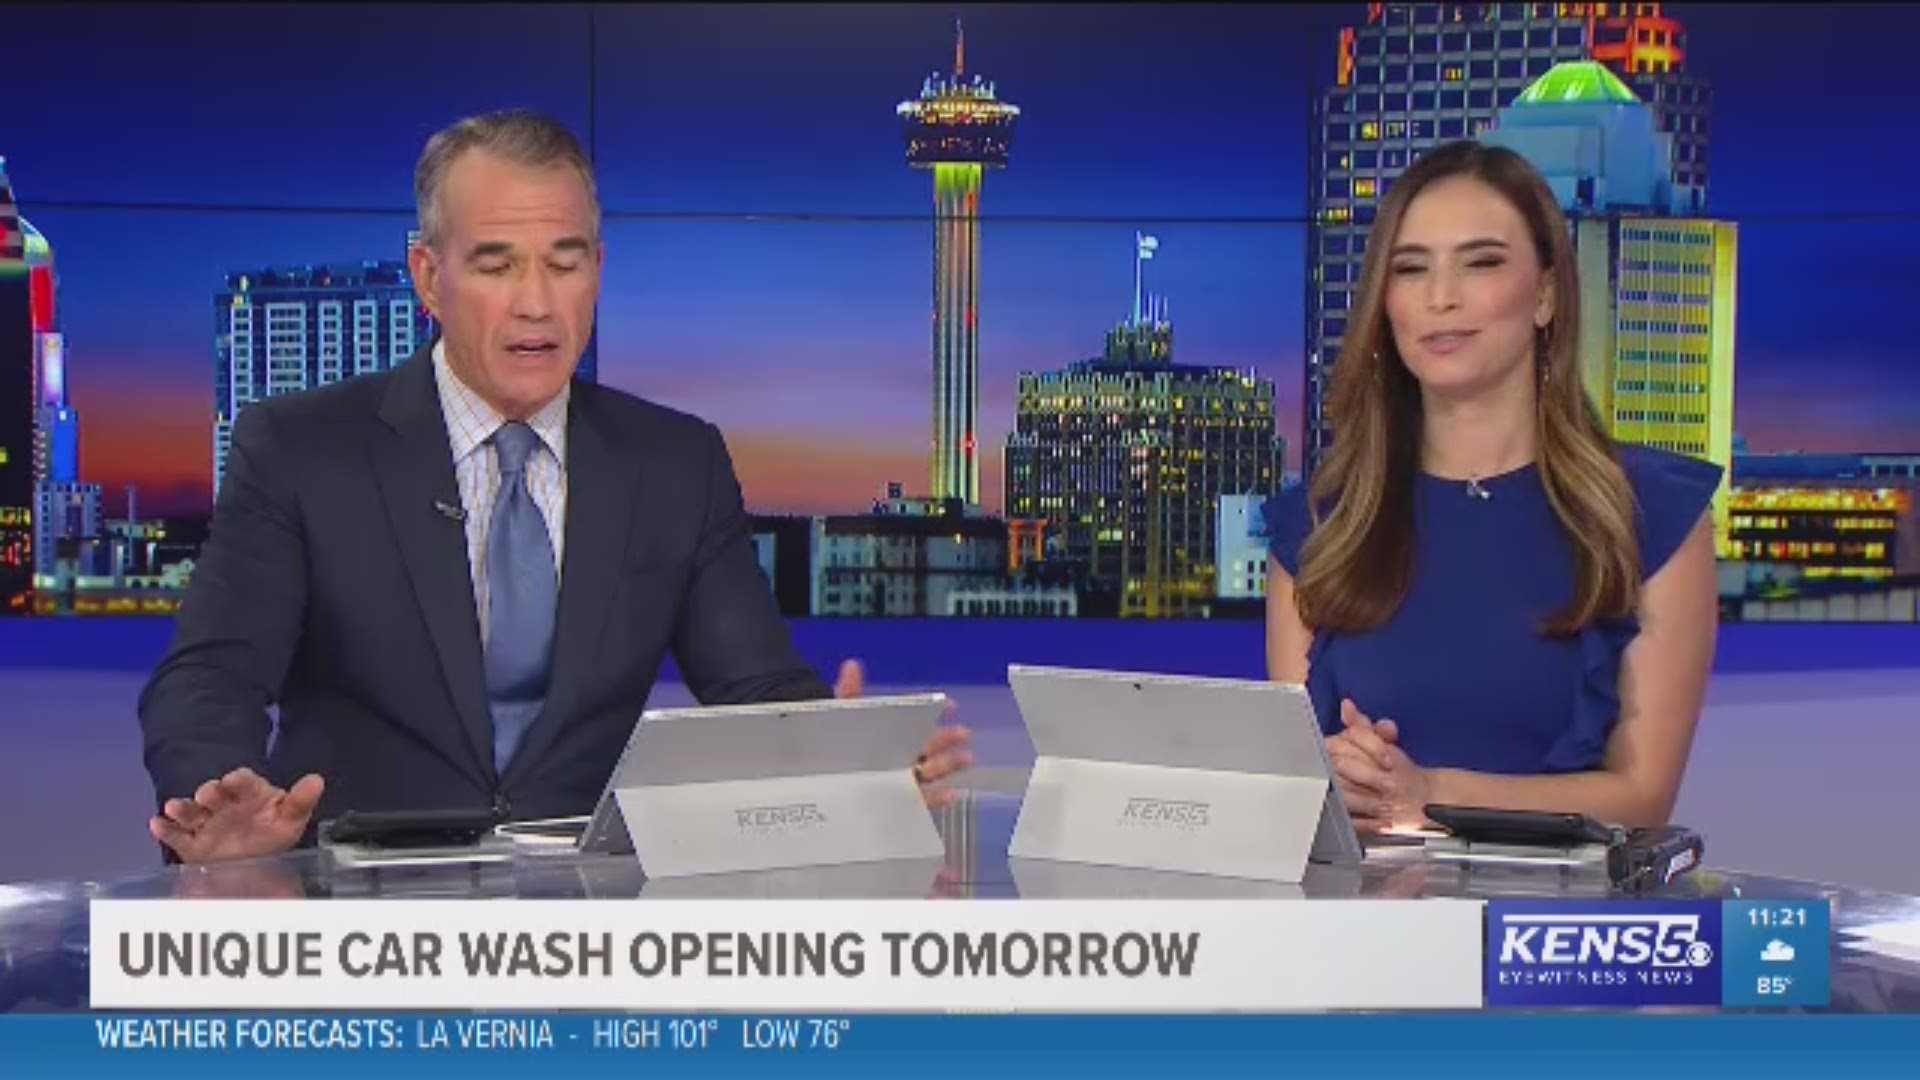 If you've never danced in a bubble bath, you'll have your chance on Saturday with the opening of Bubble Bath Car Wash, which adds creative elements to the drive-thru experience.